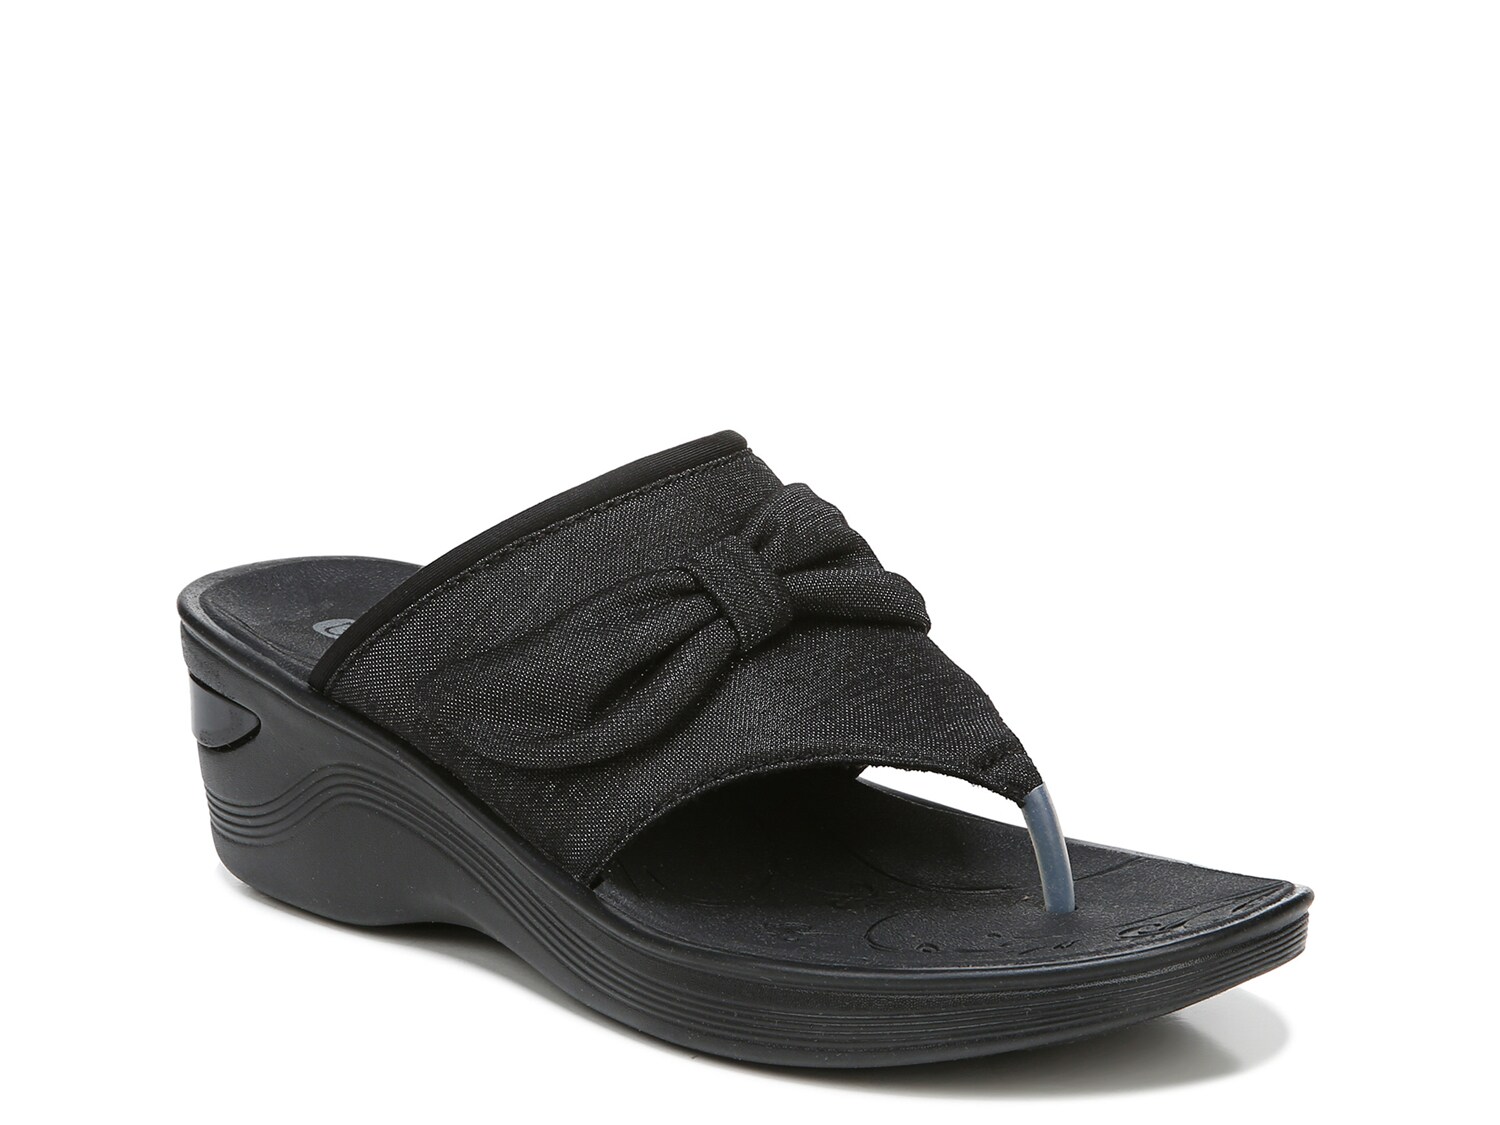 BZees Dancing Queen Wedge Sandal - Free Shipping | DSW